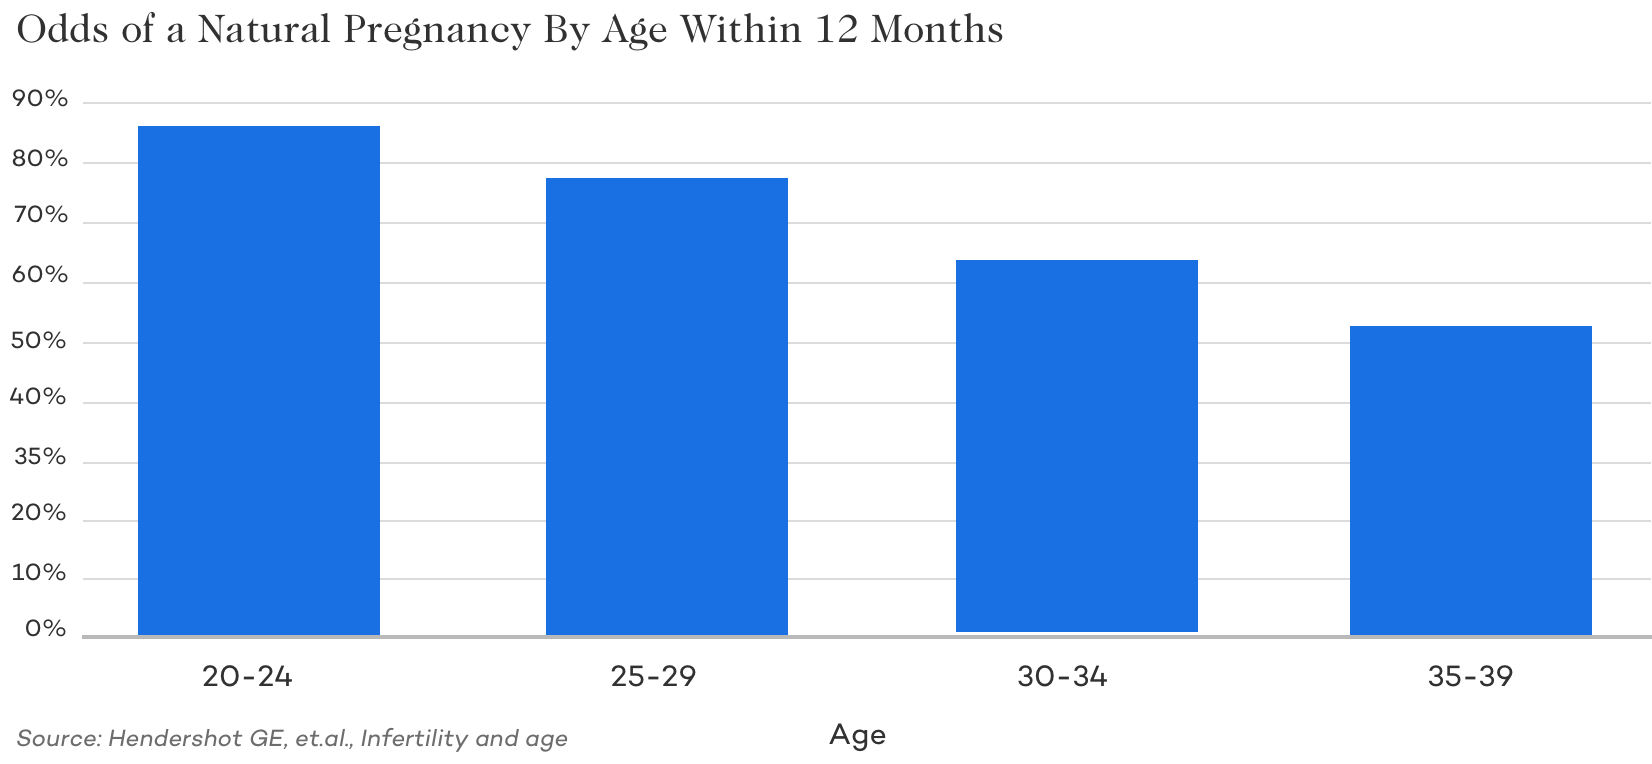 chances of getting pregnant by age within 12 months chart